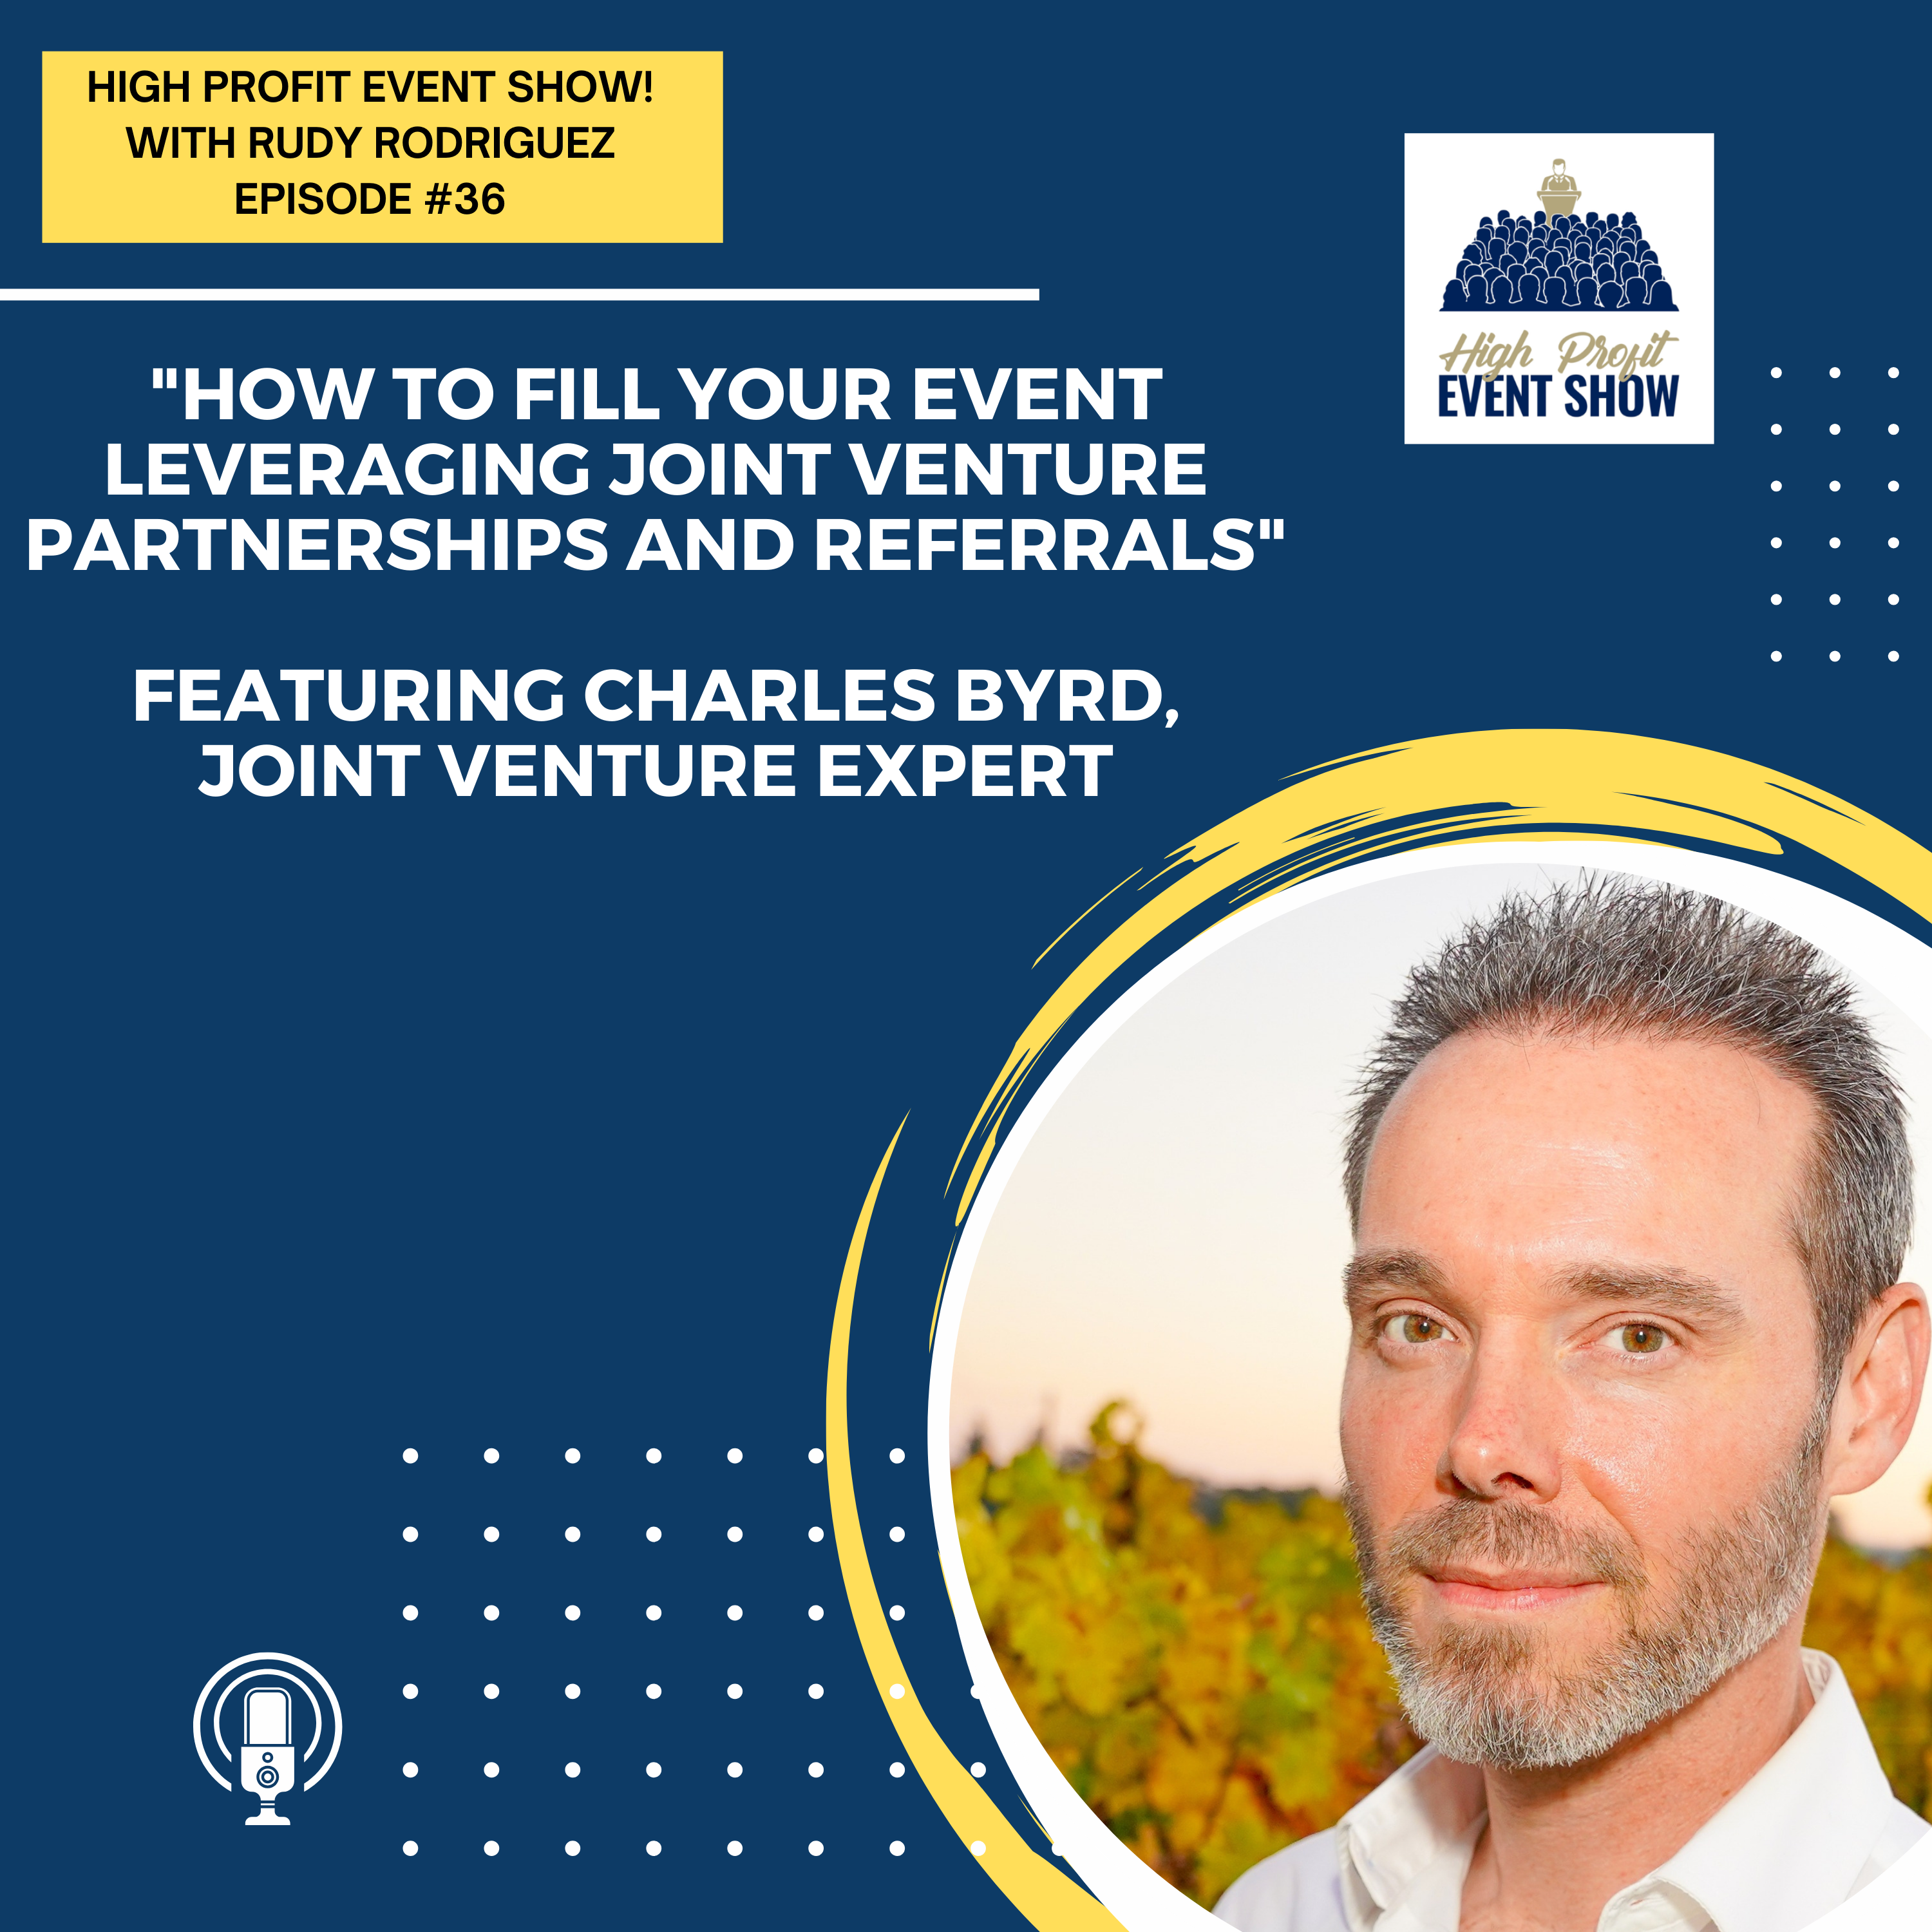 Episode 36: How to Fill Your Event Leveraging Joint Venture Partnerships and Referrals with Charles Byrd!